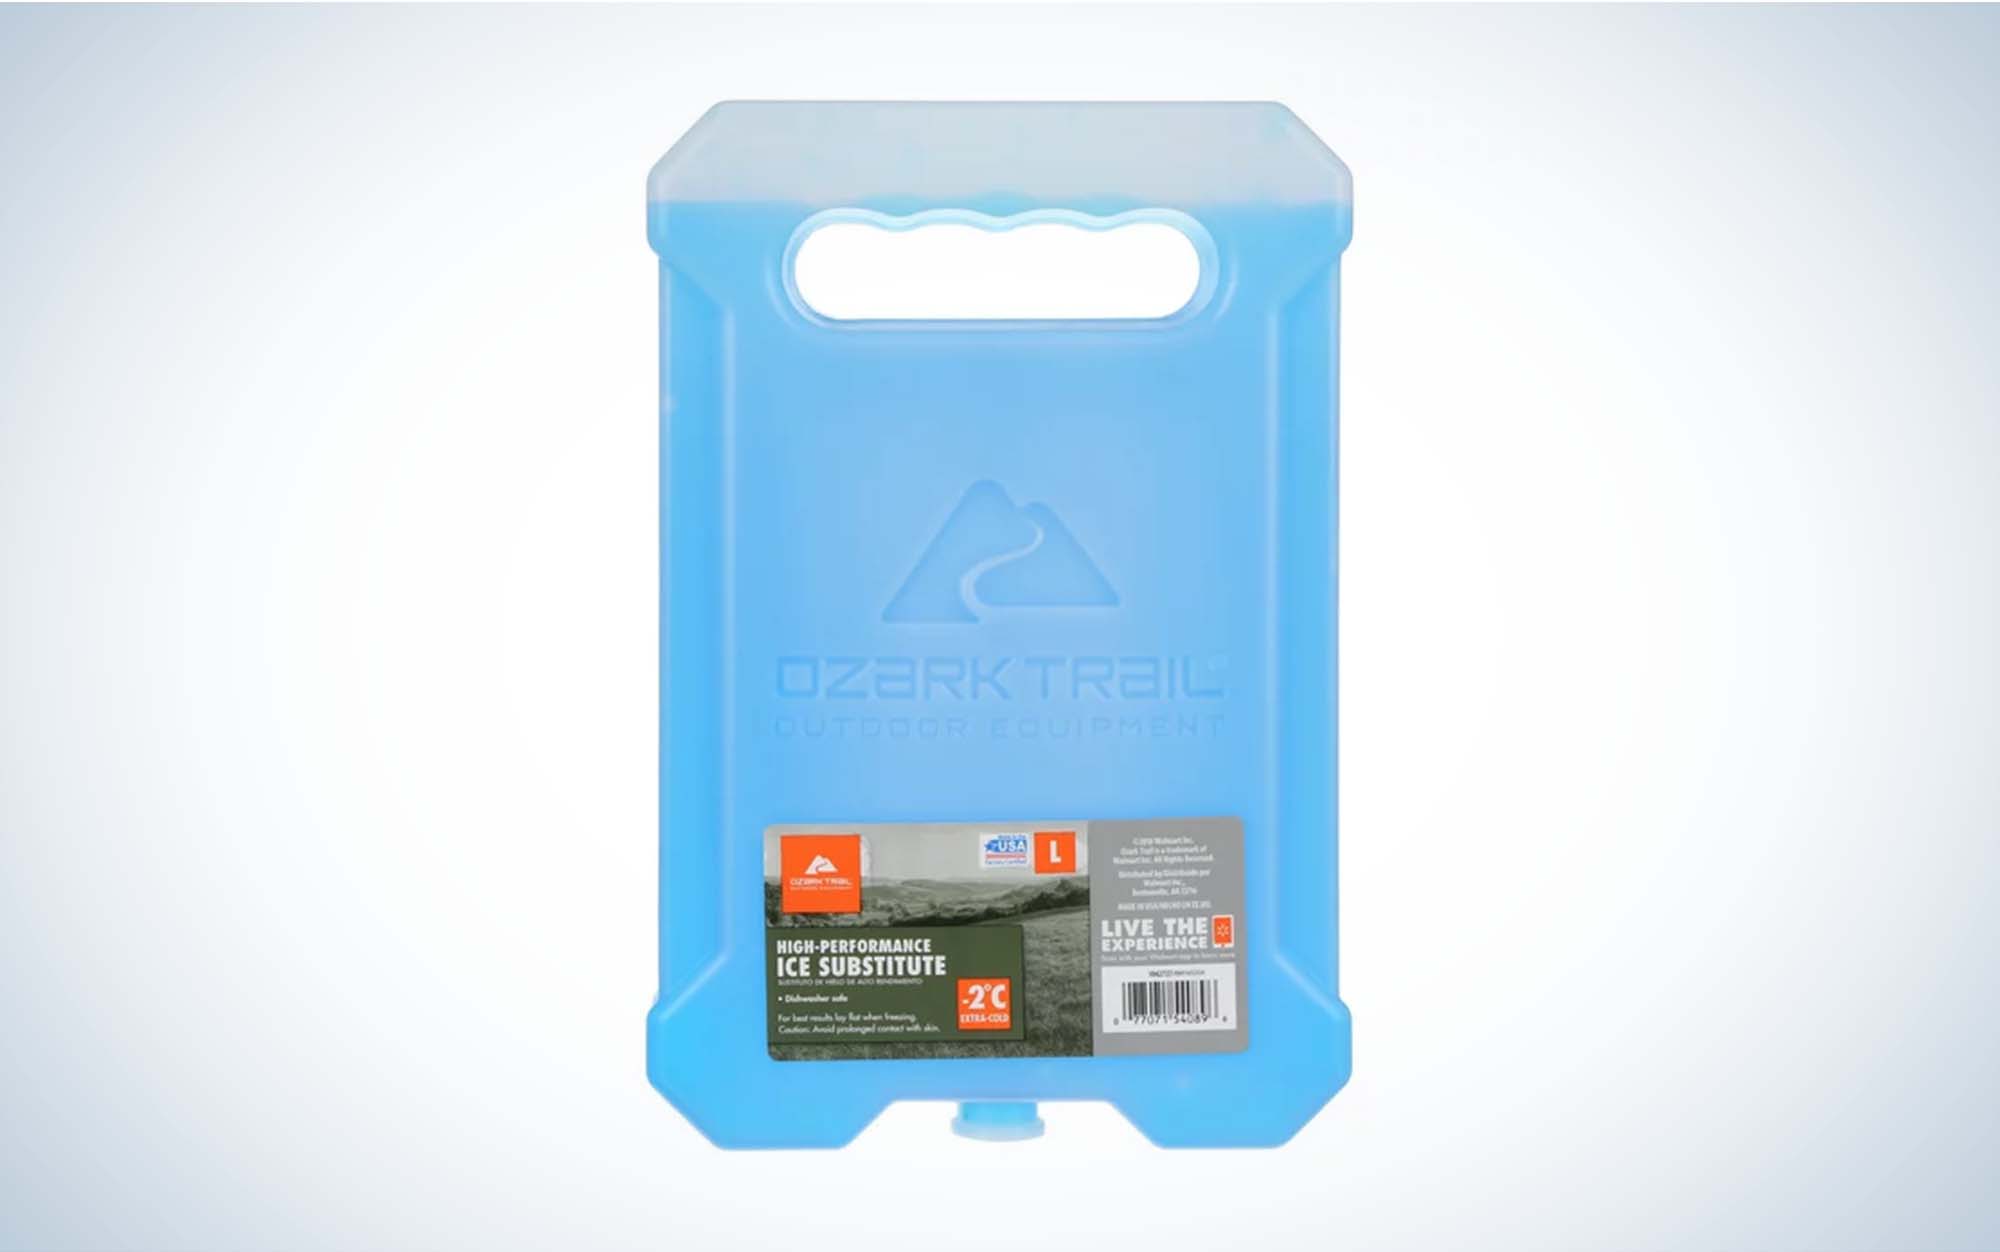 https://www.outdoorlife.com/wp-content/uploads/2022/08/24/Ozark-Trail-2-Degree-Extra-Cold-Ice-Substitute-ice-pack.jpg